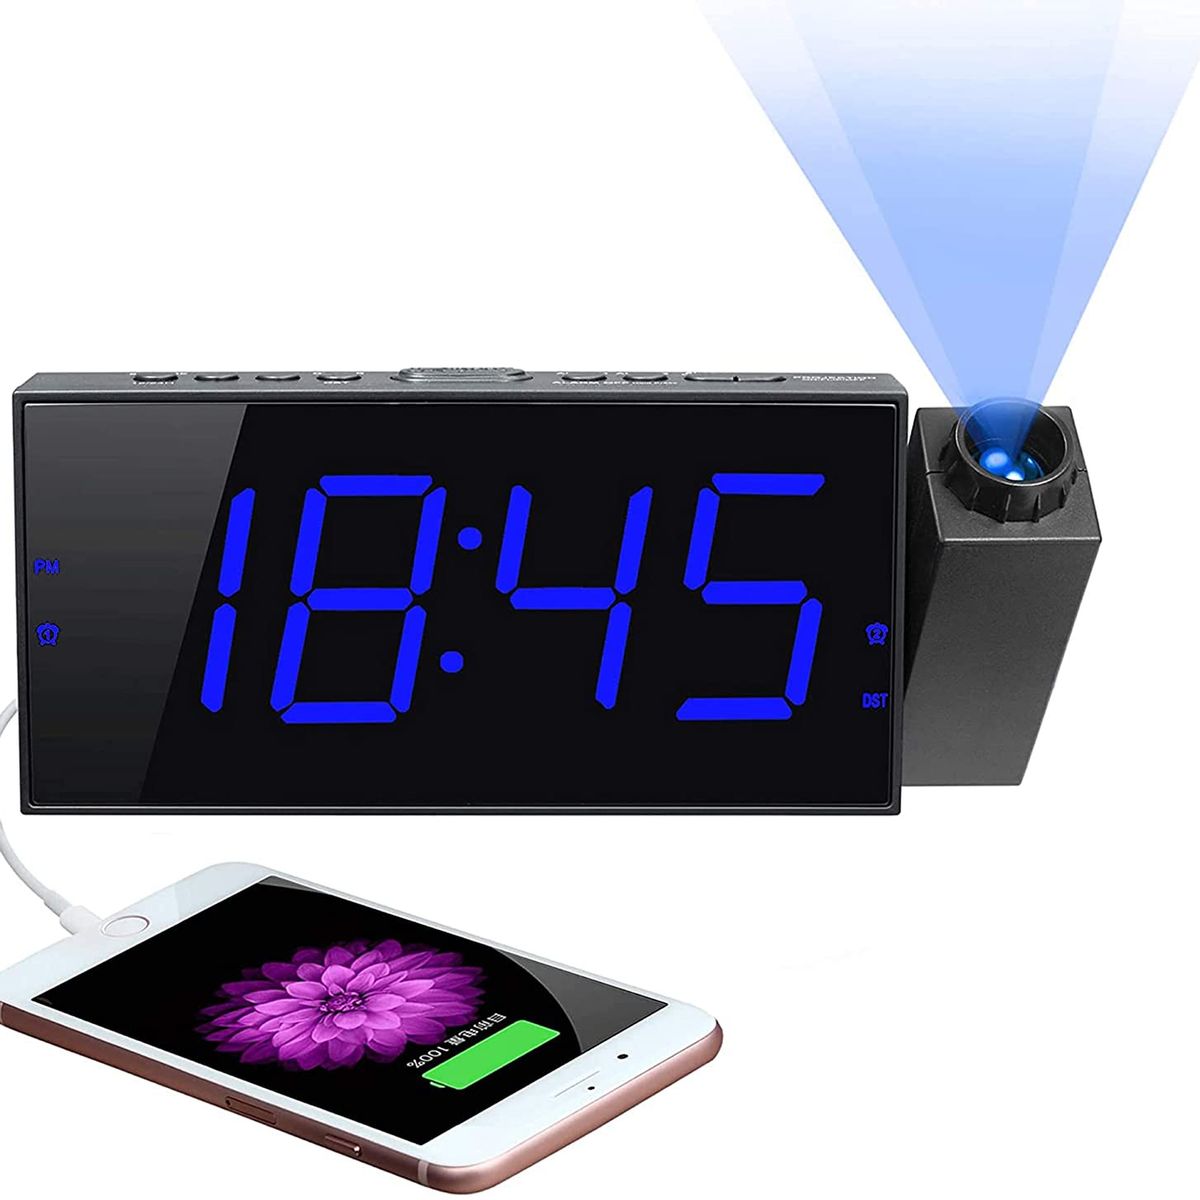 Battery Backup USB Charger 6 Large LED Screen Alarm Clock Projection Digital Alarm Clock with FM Radio Alarm Clock with Projection on Ceiling Super Loud Dual Alarm Clock for Heavy Sleepers Adult 